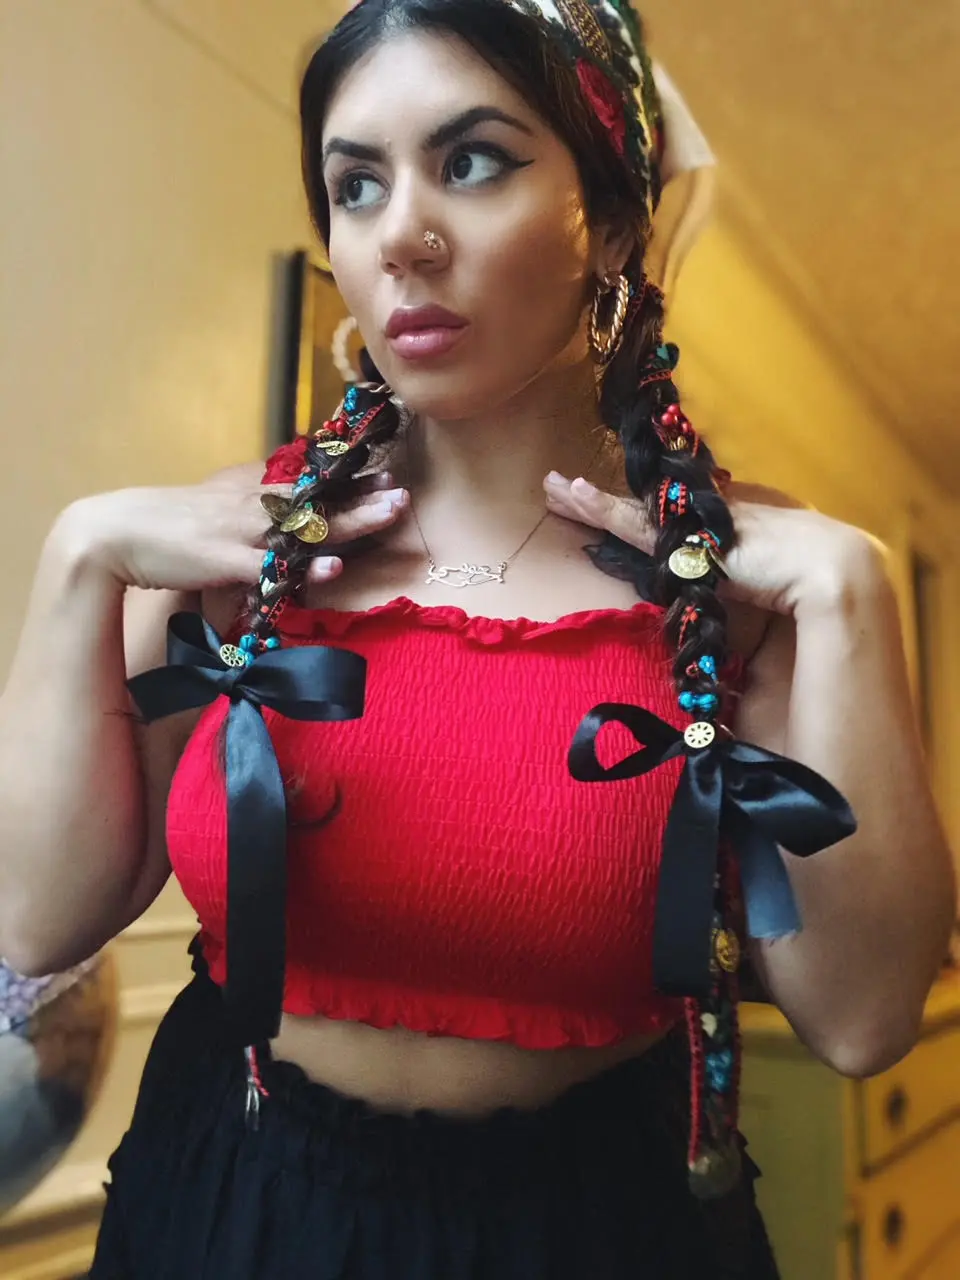 A portrait of Naomi Puzzello with ribbons in her braided hair.